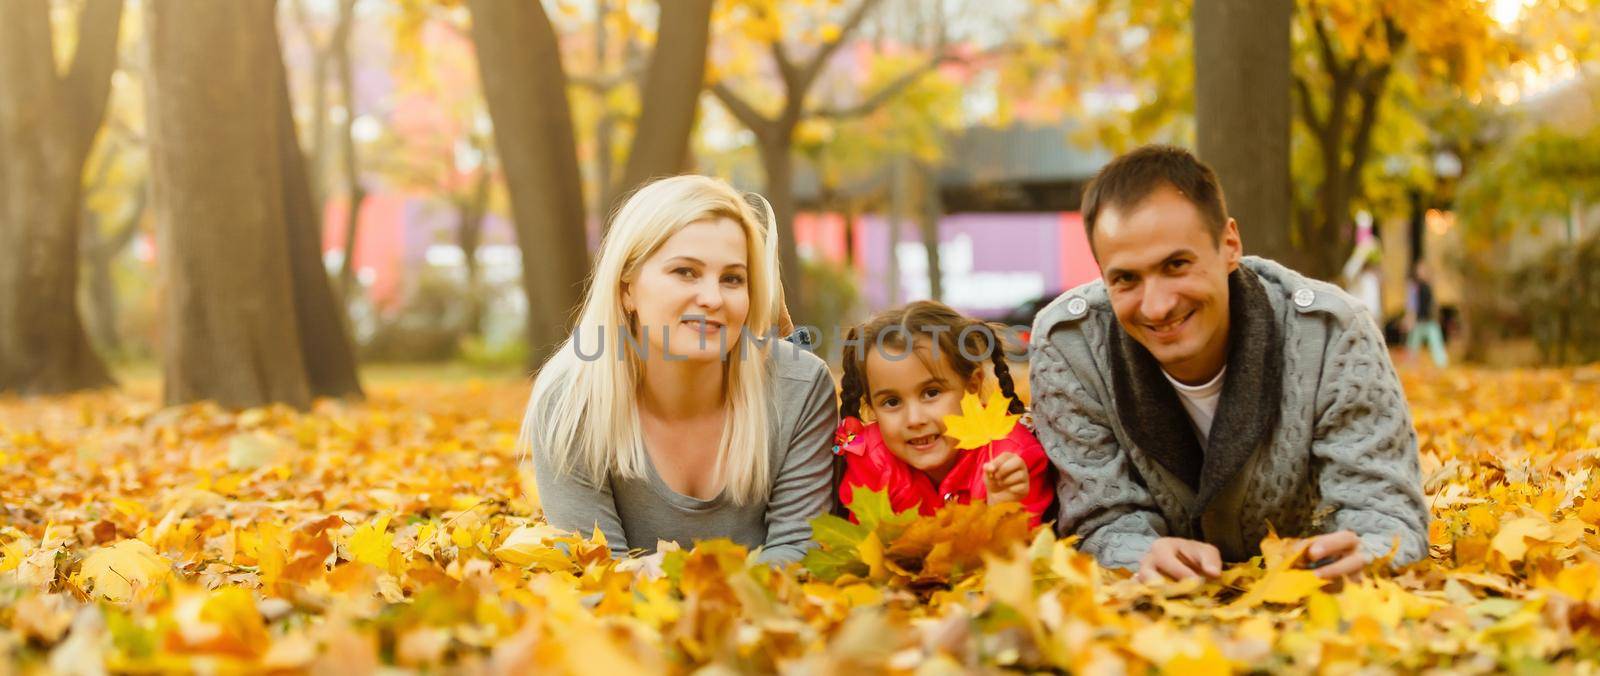 Happy family is sitting in beautiful autumn park by Andelov13